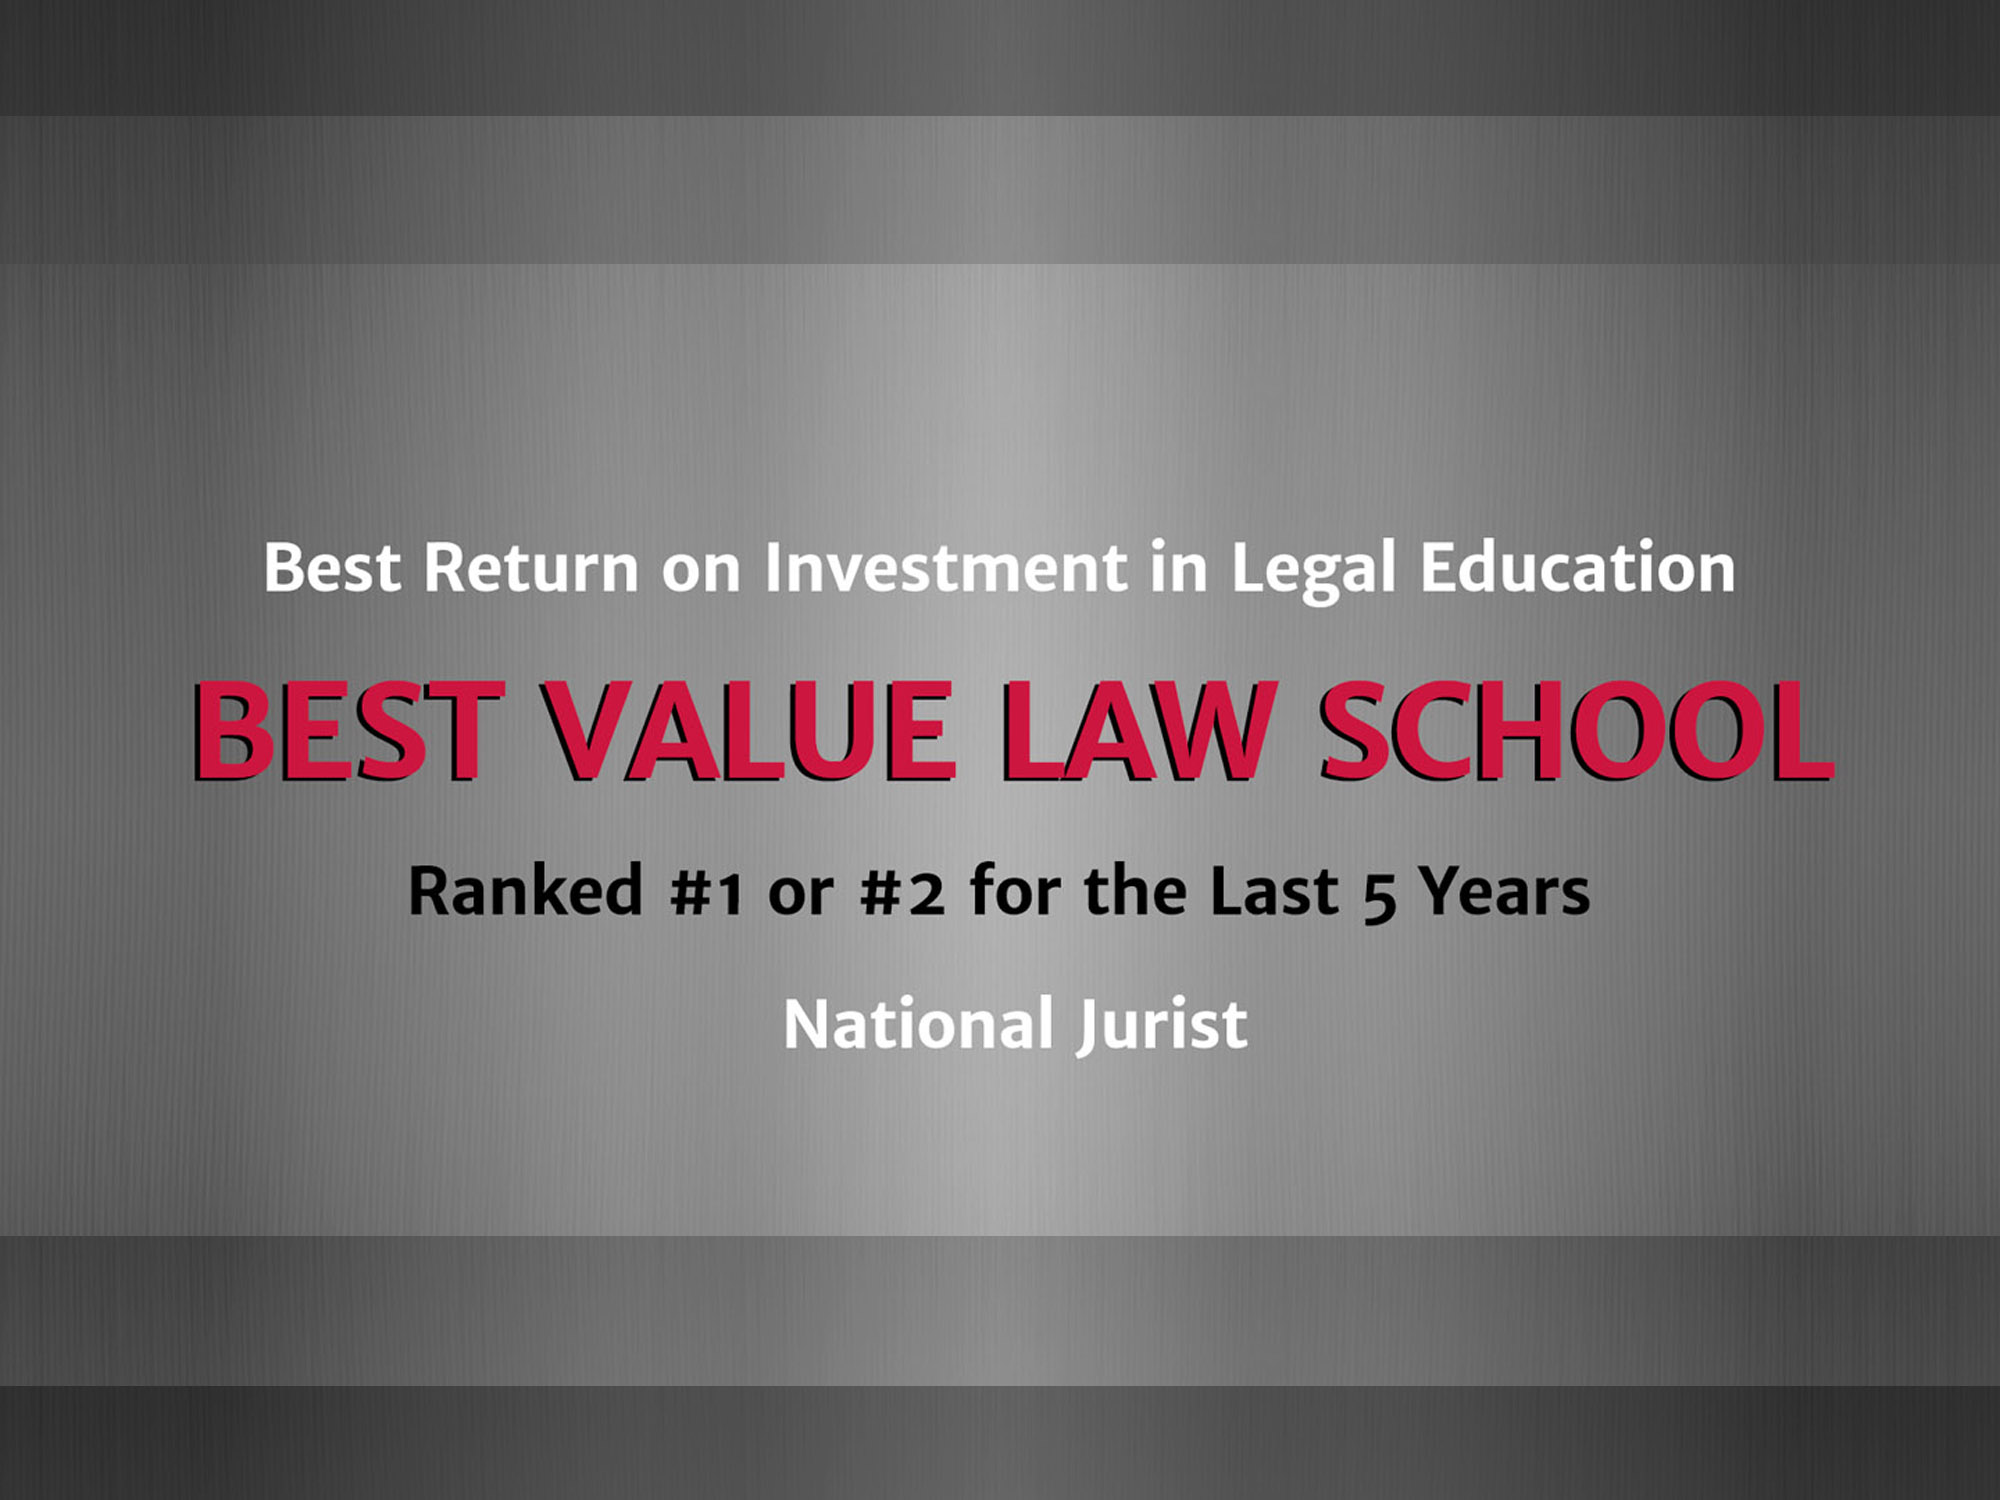 School of Law remains as one of the best returns on investment